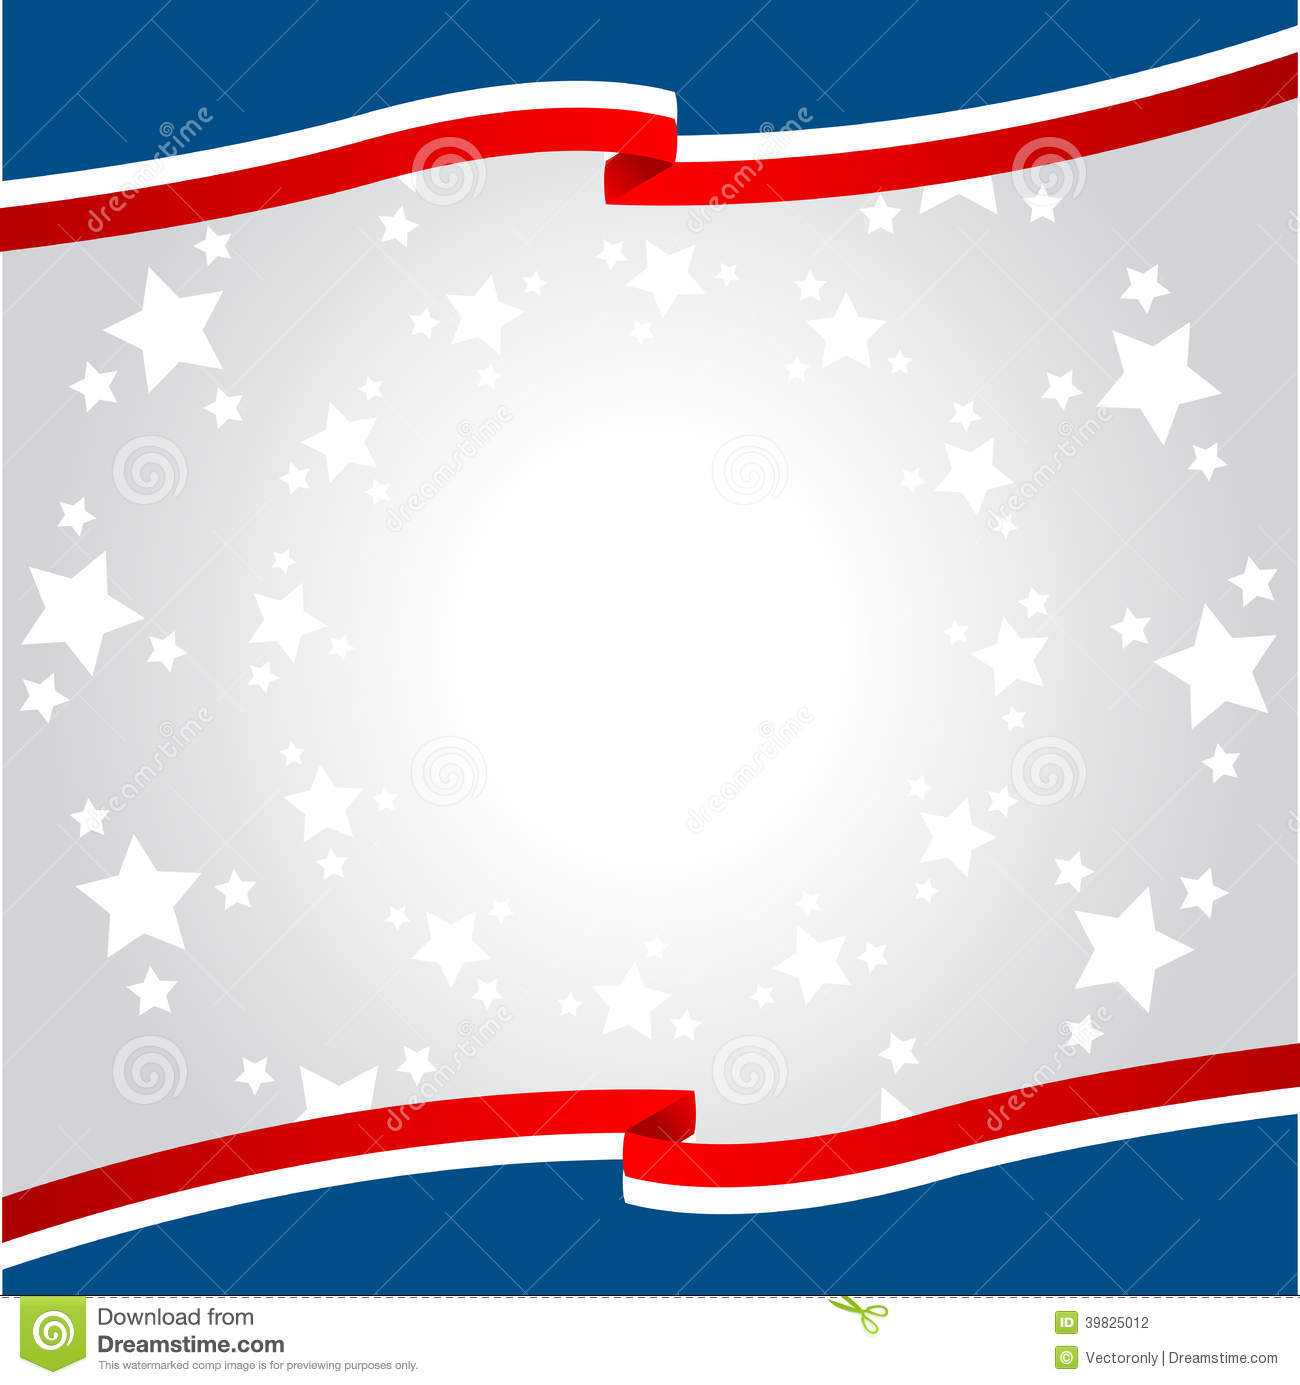 Patriotic Stock Vector Image 39825012 Quality Backgrounds With Patriotic Powerpoint Template